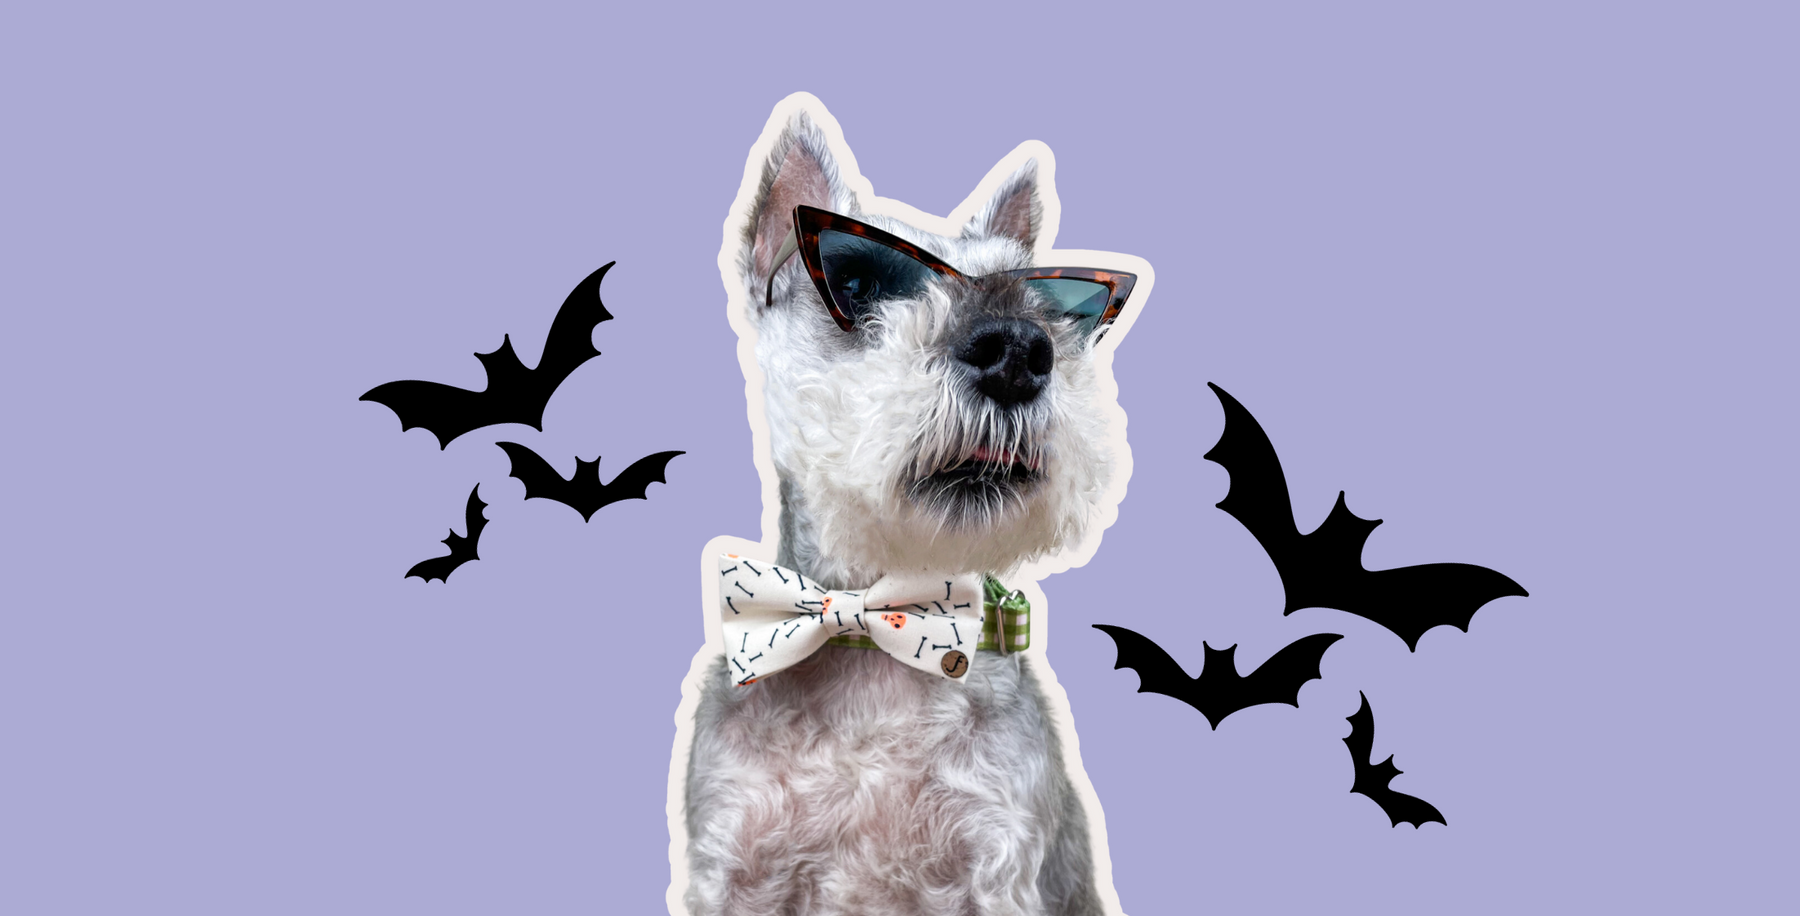 Gray dog wears sunglasses and skull and crossbones bow tie on a purple background with black bats illustrated around him.